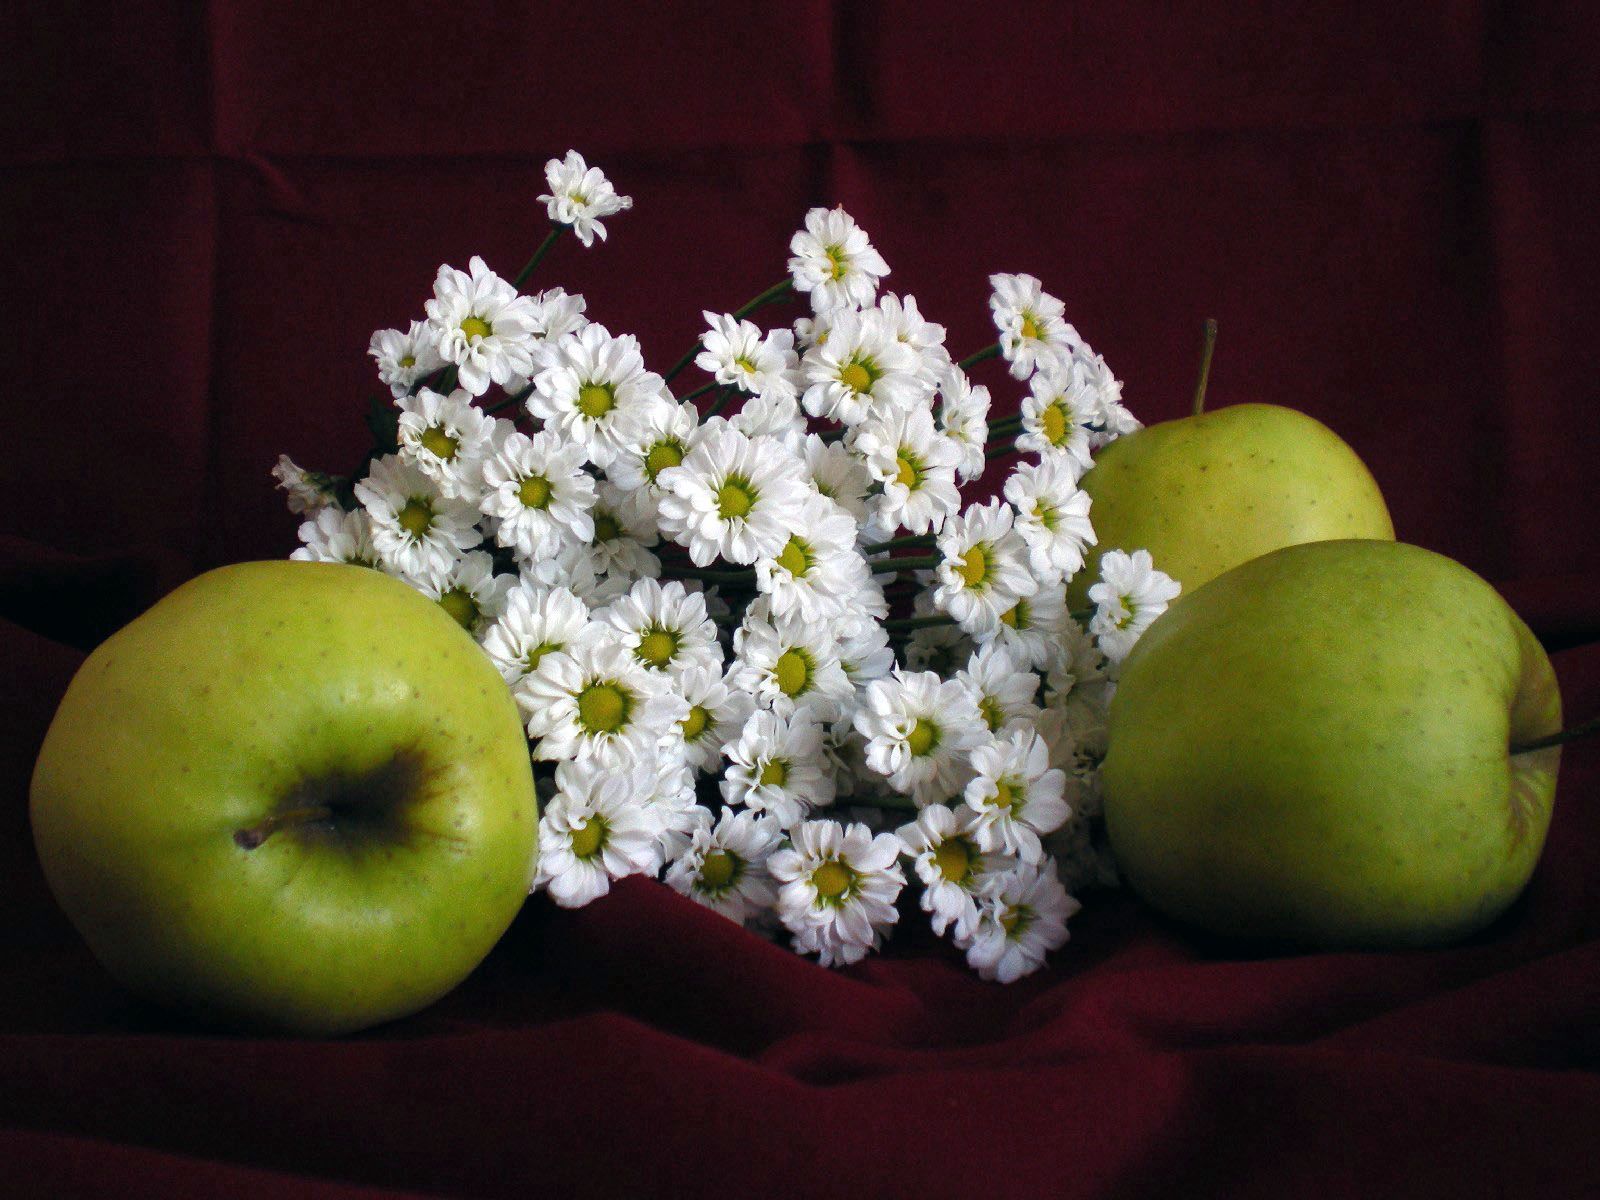 fruits, flowers, food, apples, camomile